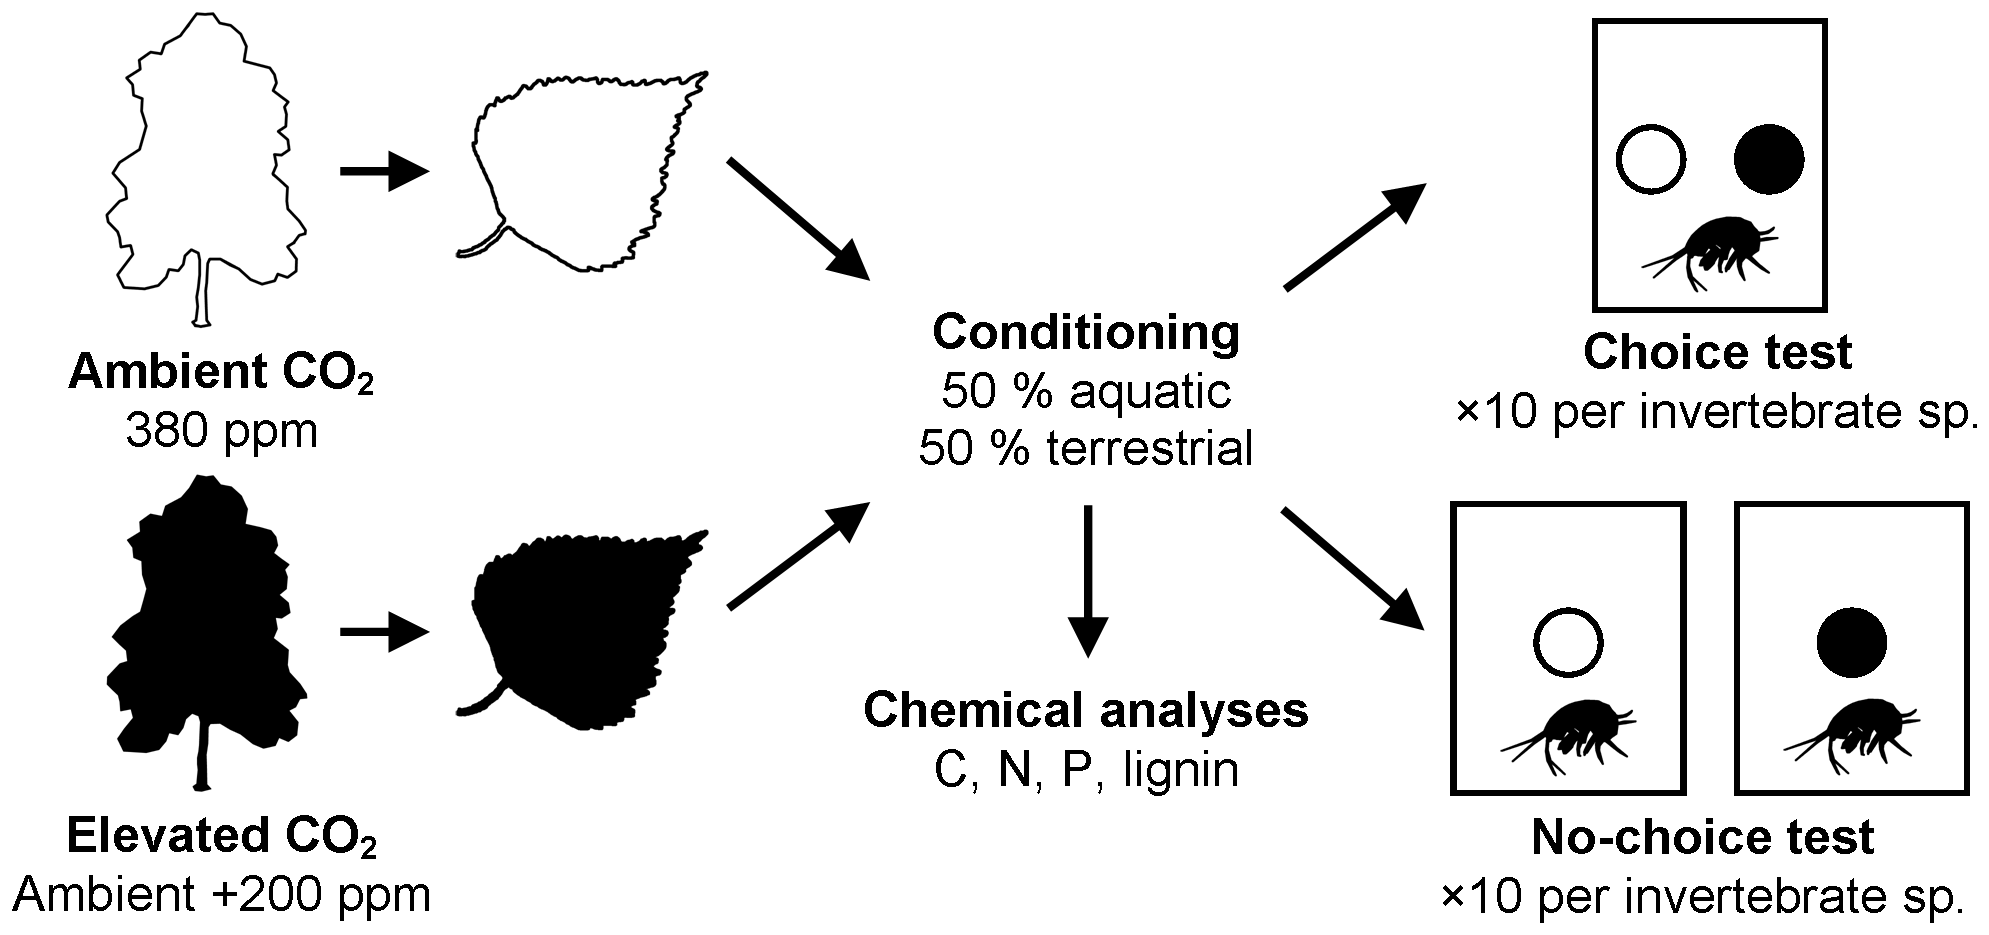 Design of an experiment showing trees growing under elevated CO2 and leaves being fed to invertebrates in choice tests.